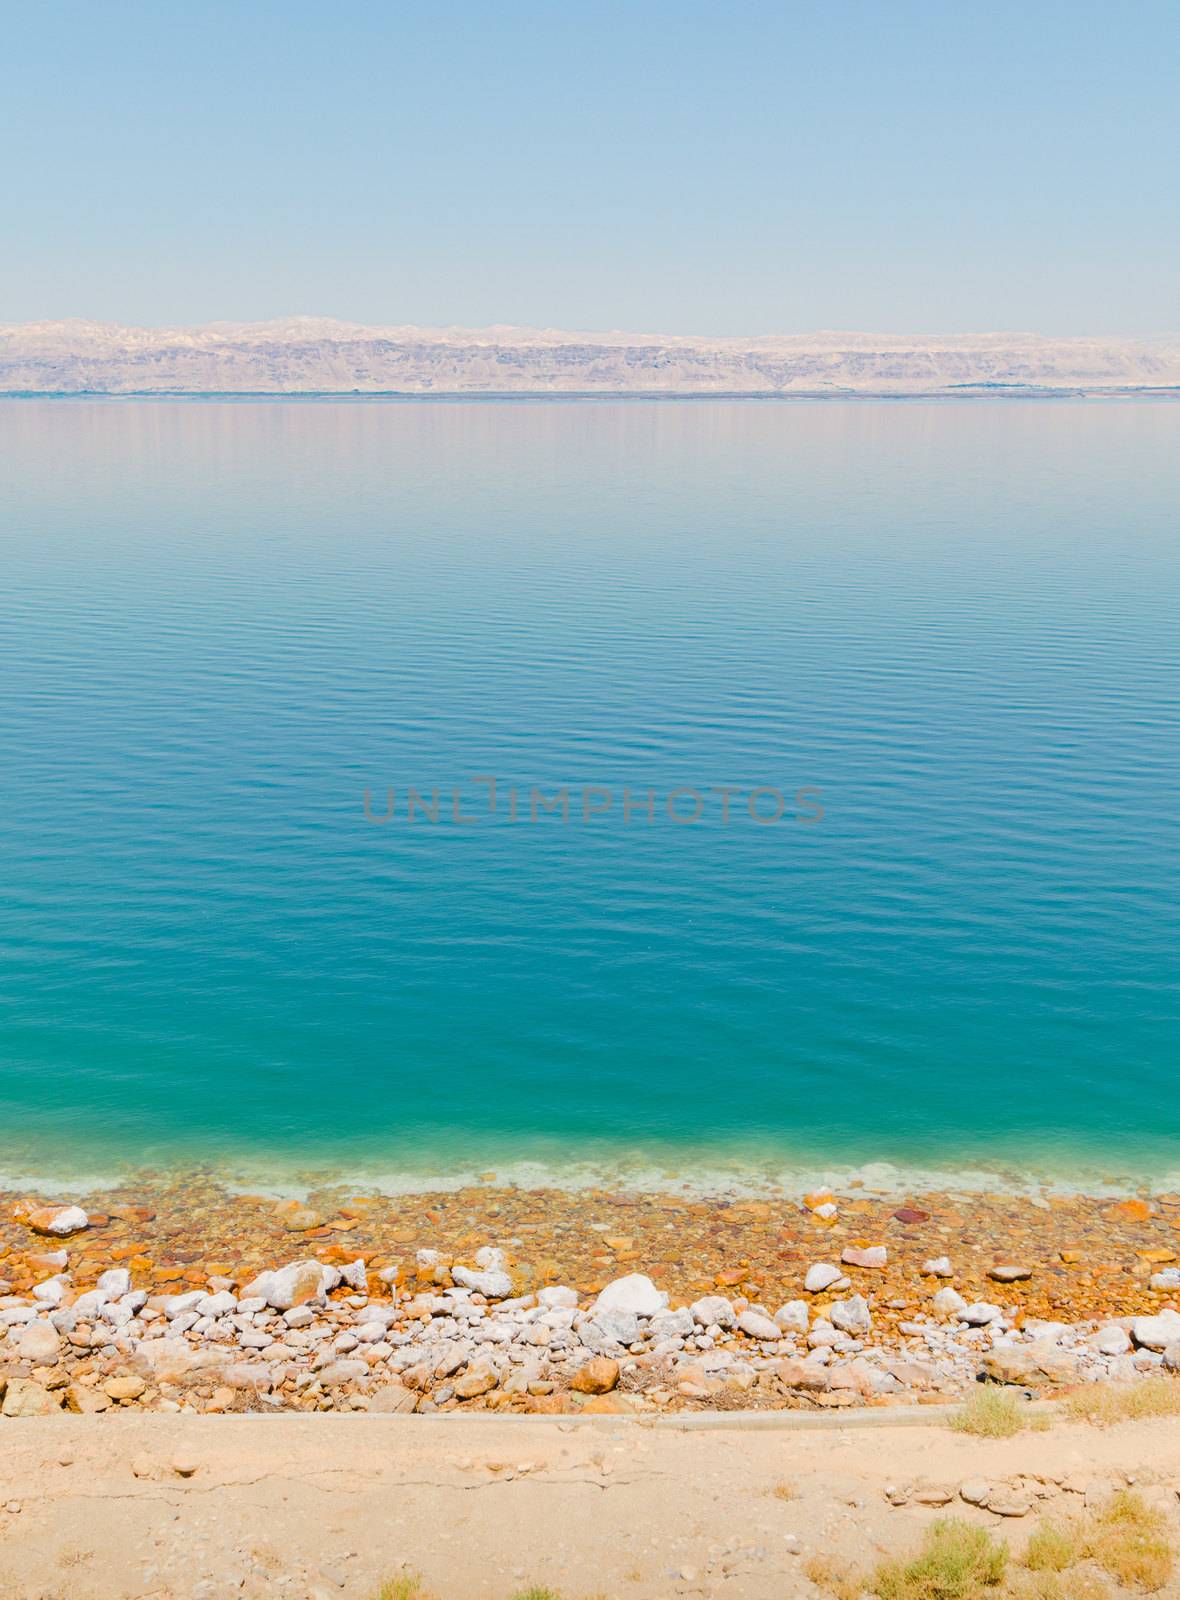 Vertical landscape view of the Dead sea shore, with salt crust and pebble beach near a tourist resort, and Israel territories mountain line on the horizon, from Madaba, Jordan, Middle East